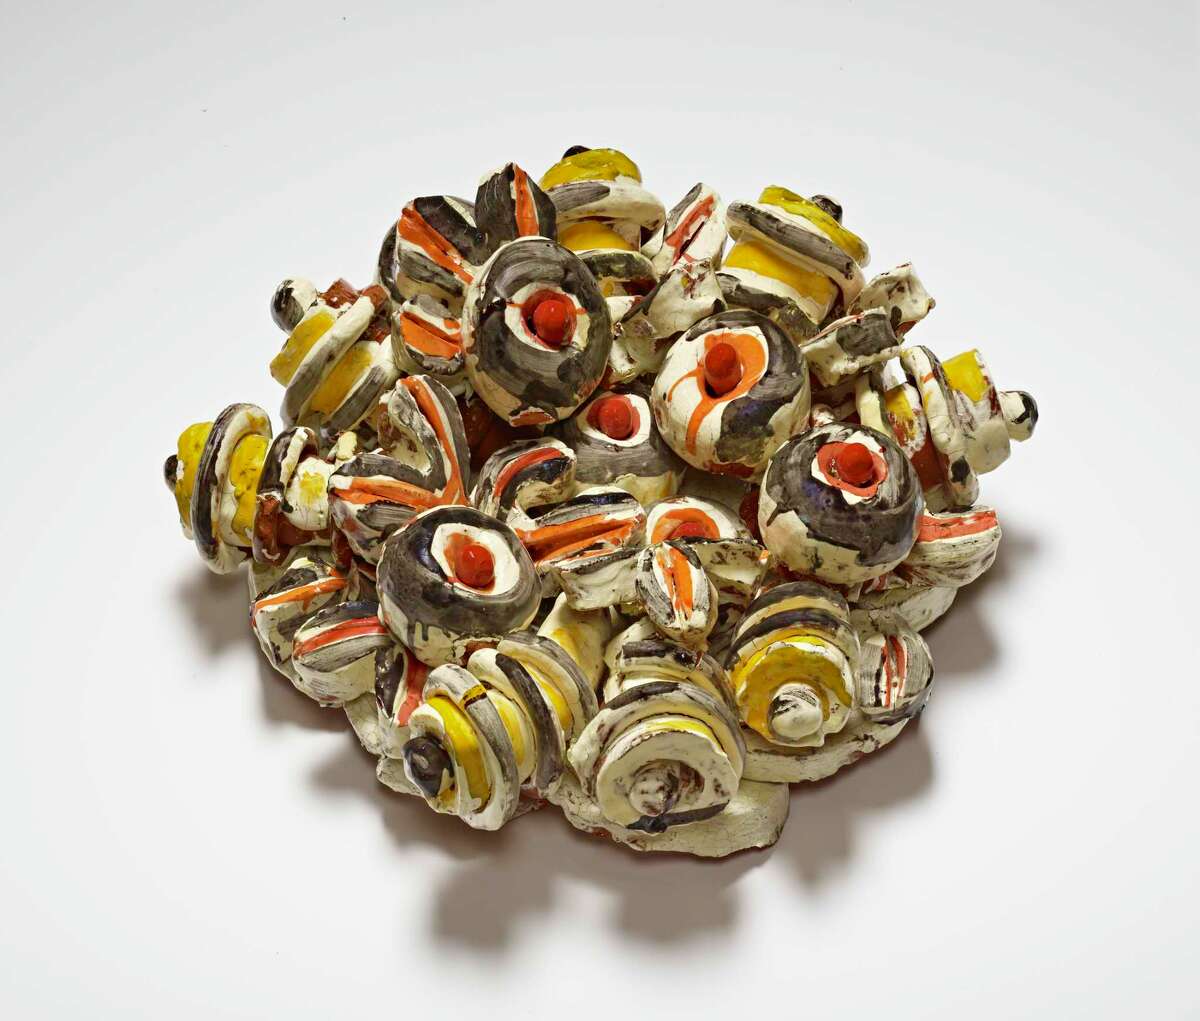 "Classical Order - Red, Yellow, Orange Enamel" is among works included in "Annabeth Rosen: Fired, Broken, Gathered, Heaped" at the Contemporary Arts Museum Houston.﻿